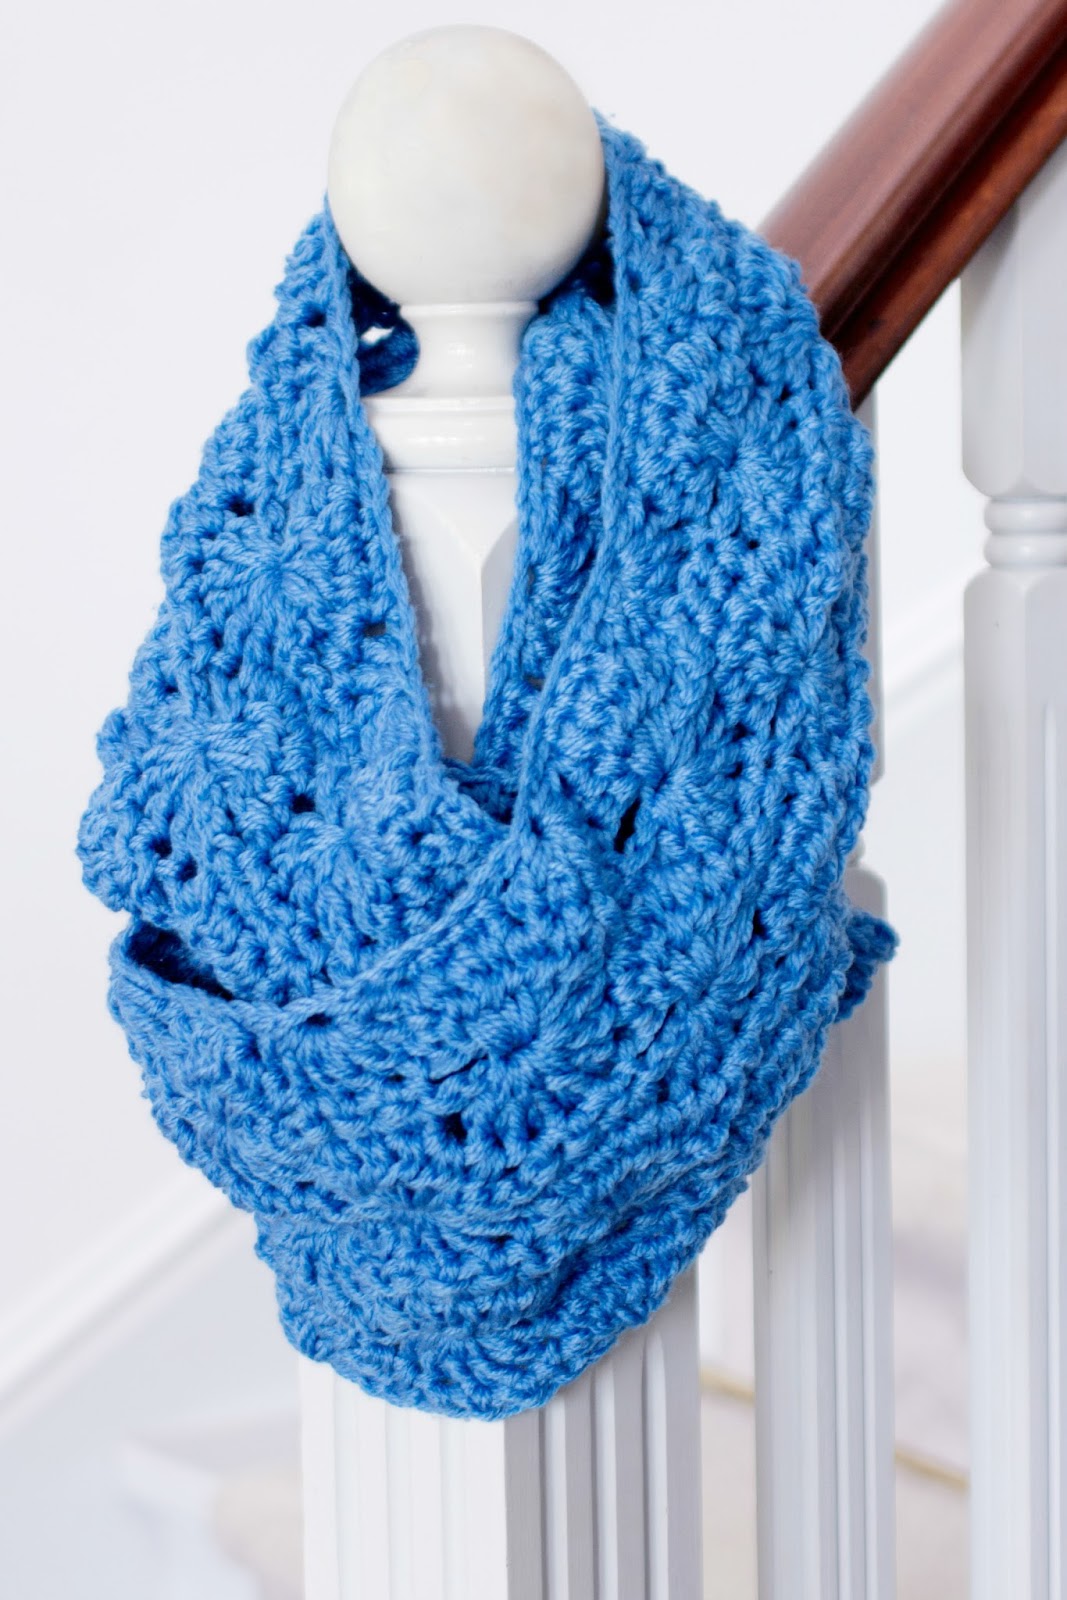 Pinteresting Projects: Free Crochet Patterns To Beat The Blues